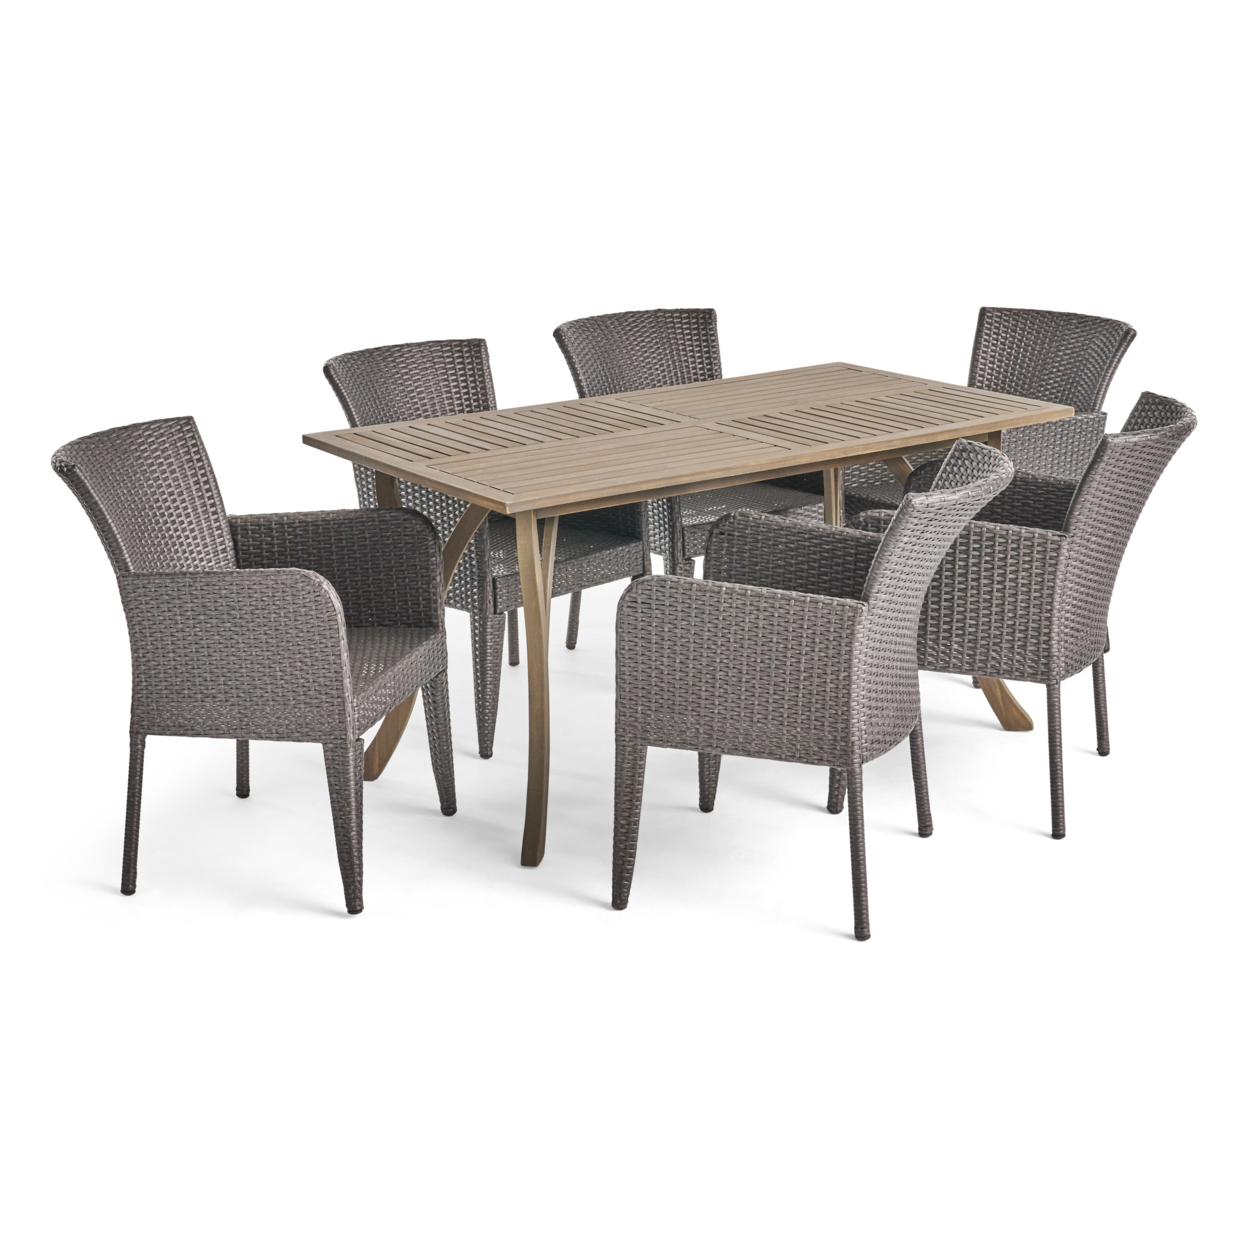 Freeman Outdoor 7 Piece Wood And Wicker Dining Set, Gray With Gray Chairs